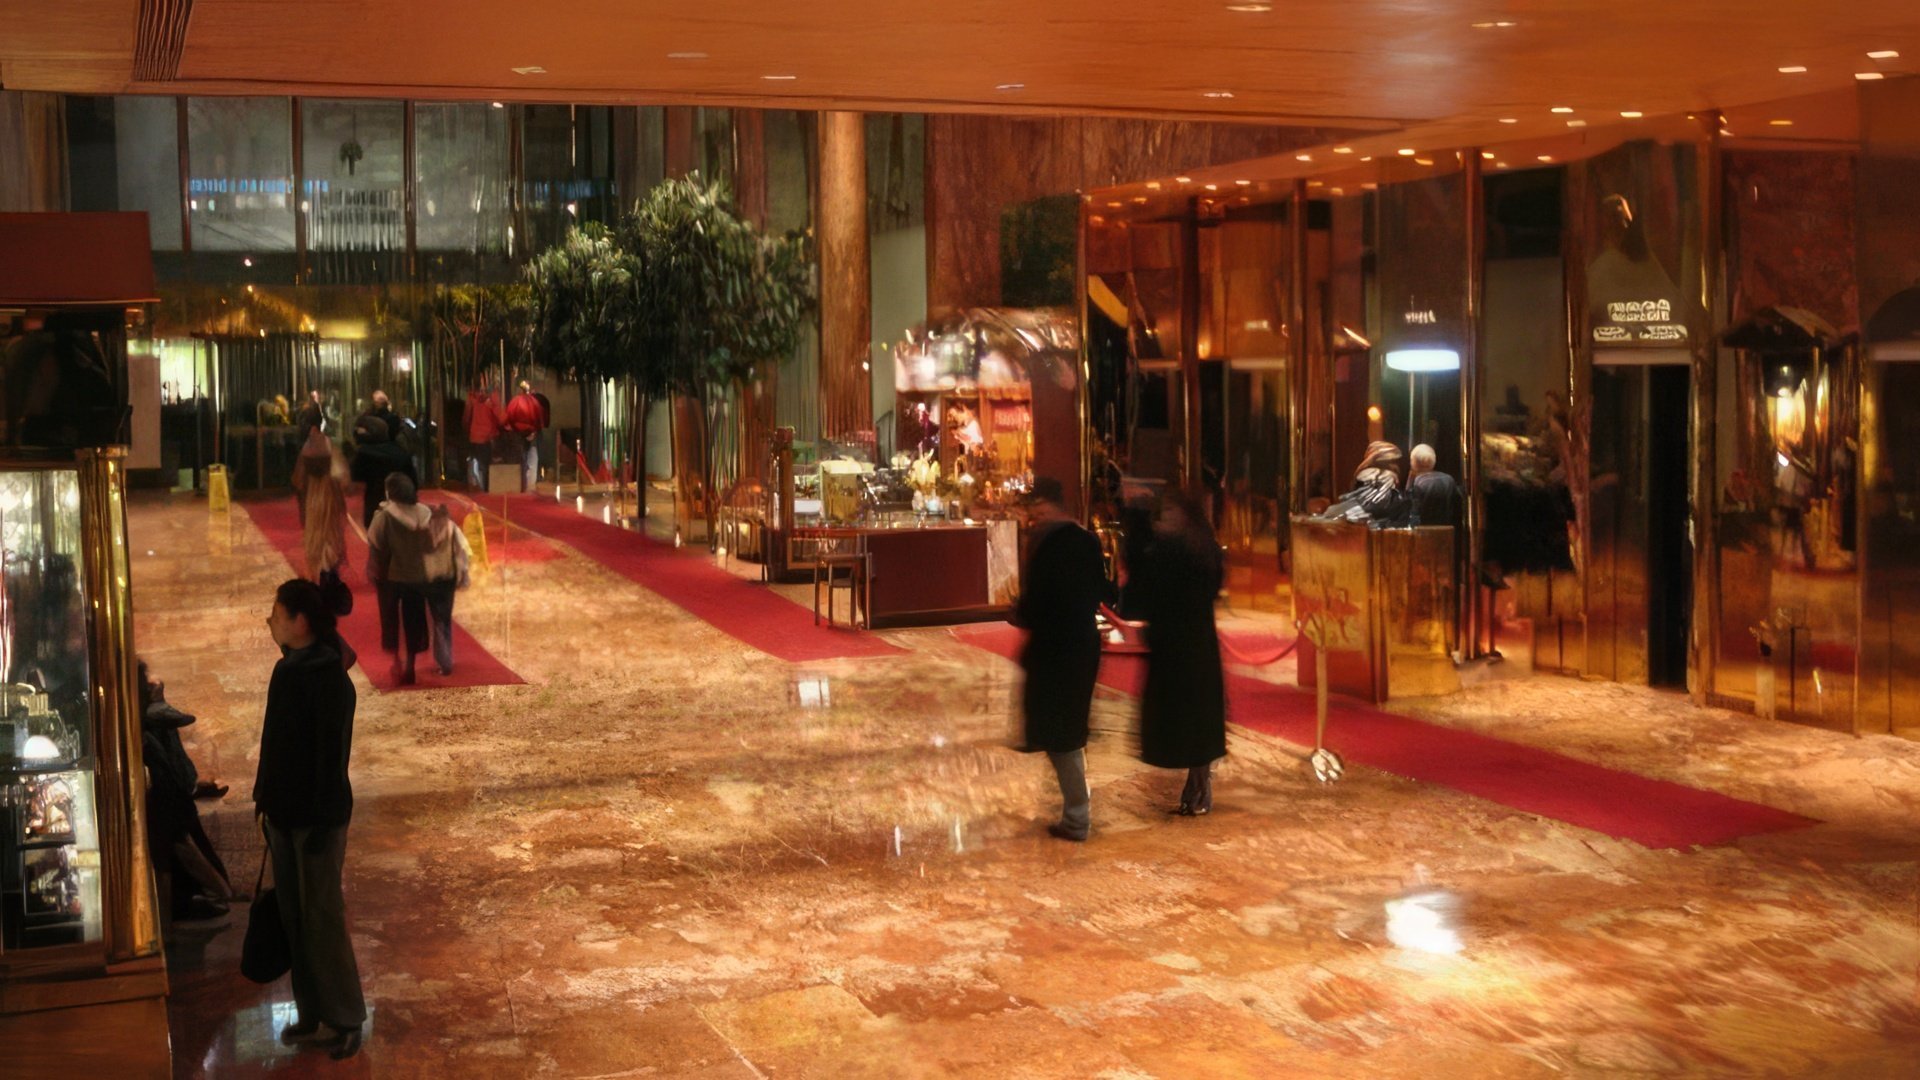 In one of the halls inside the Trump Tower